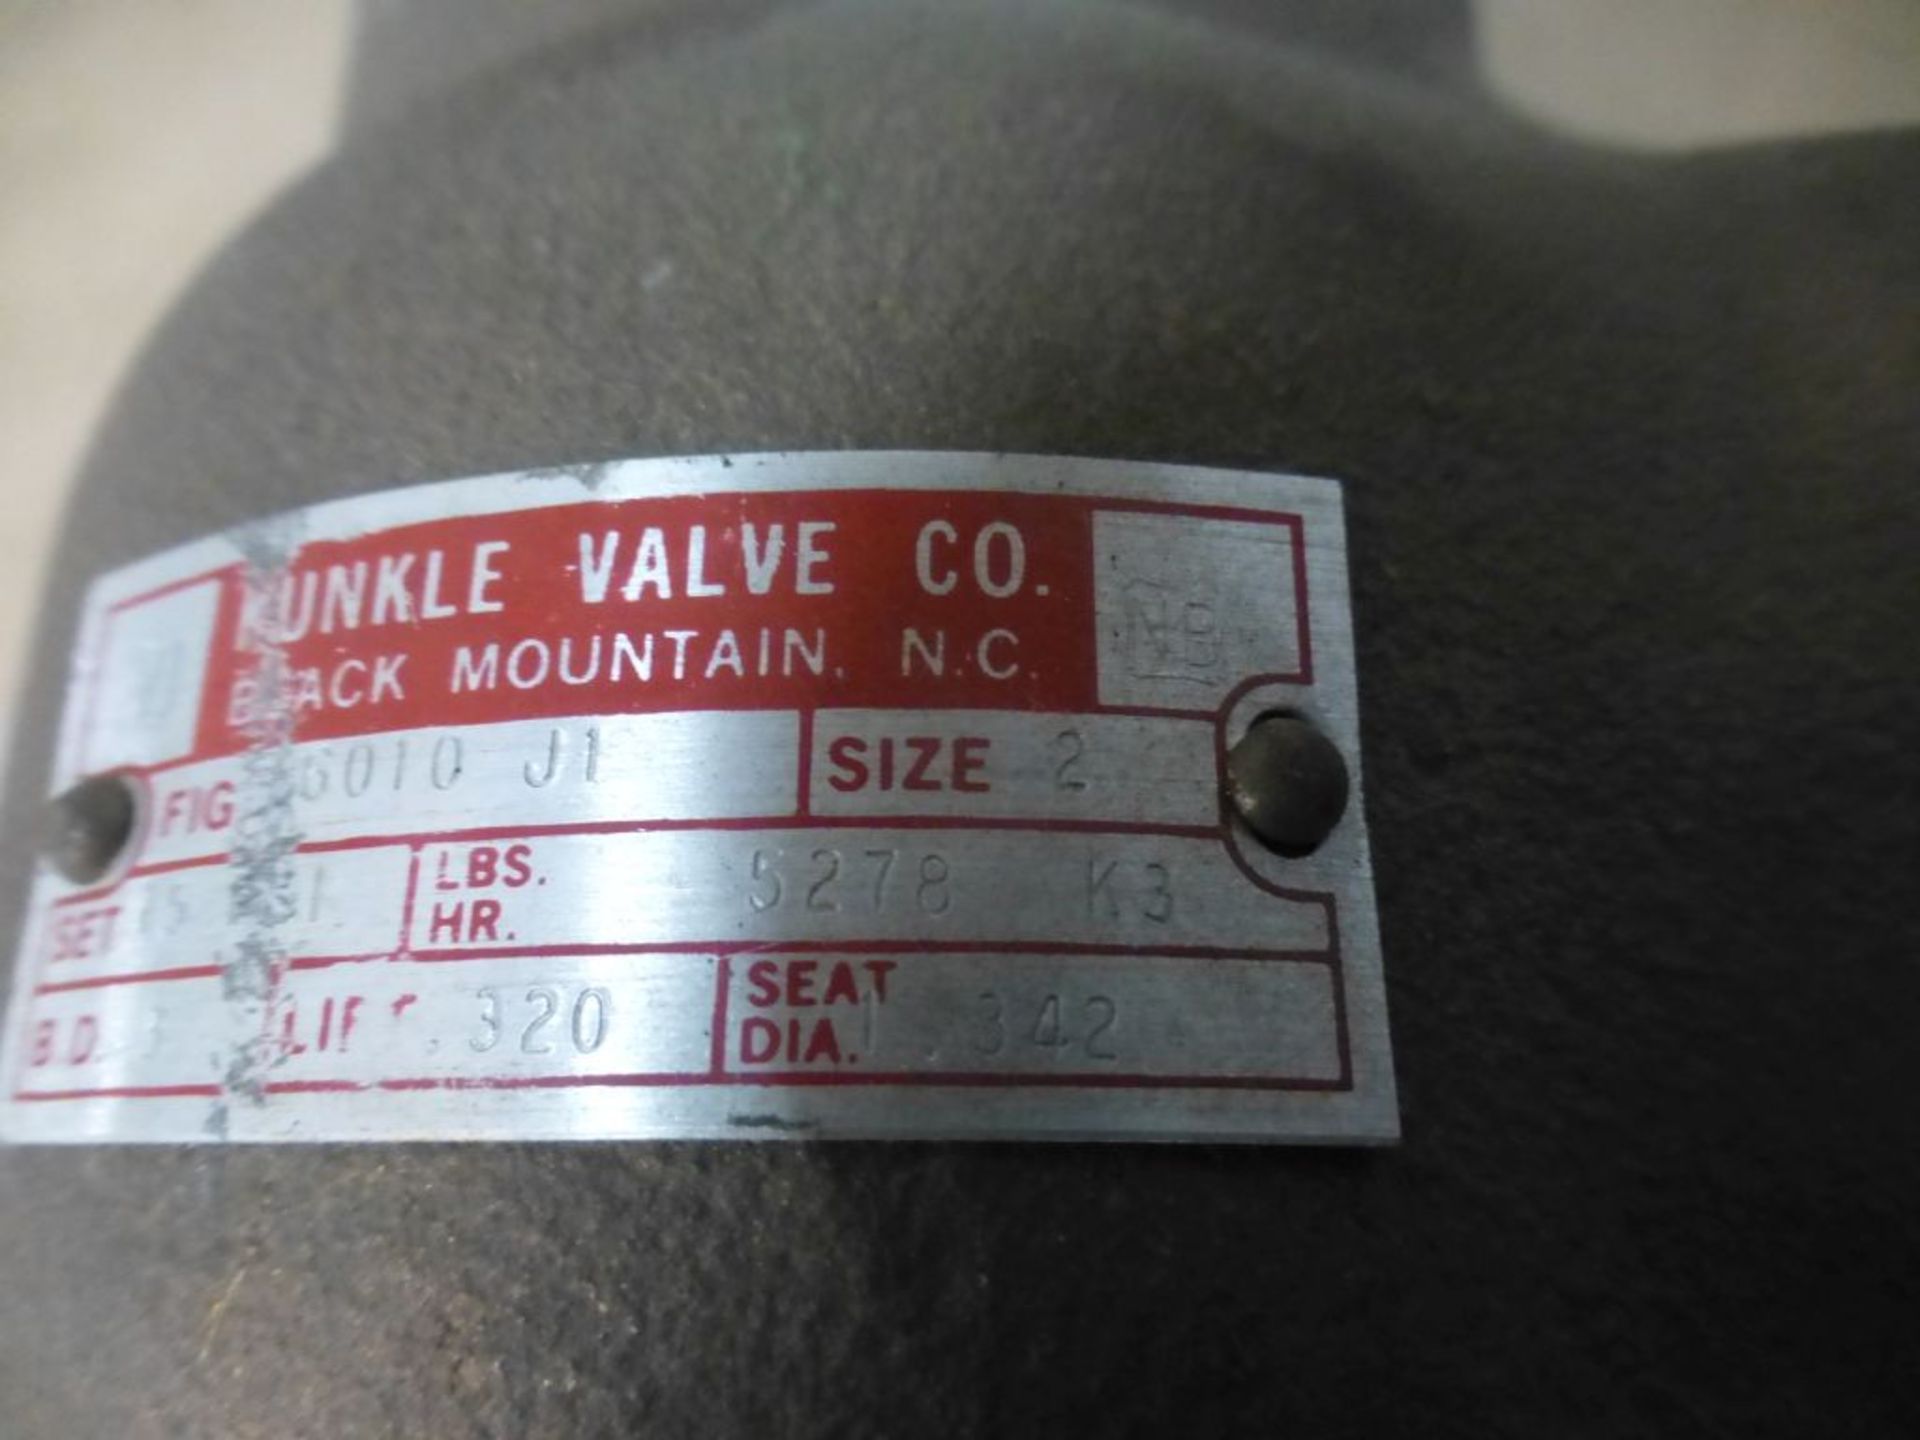 Lot of Assorted Valves|(2) Kunkle Valves, Size: 2", 75 PSI; (1) Dresser Consolidated Relief Valves, - Image 7 of 22